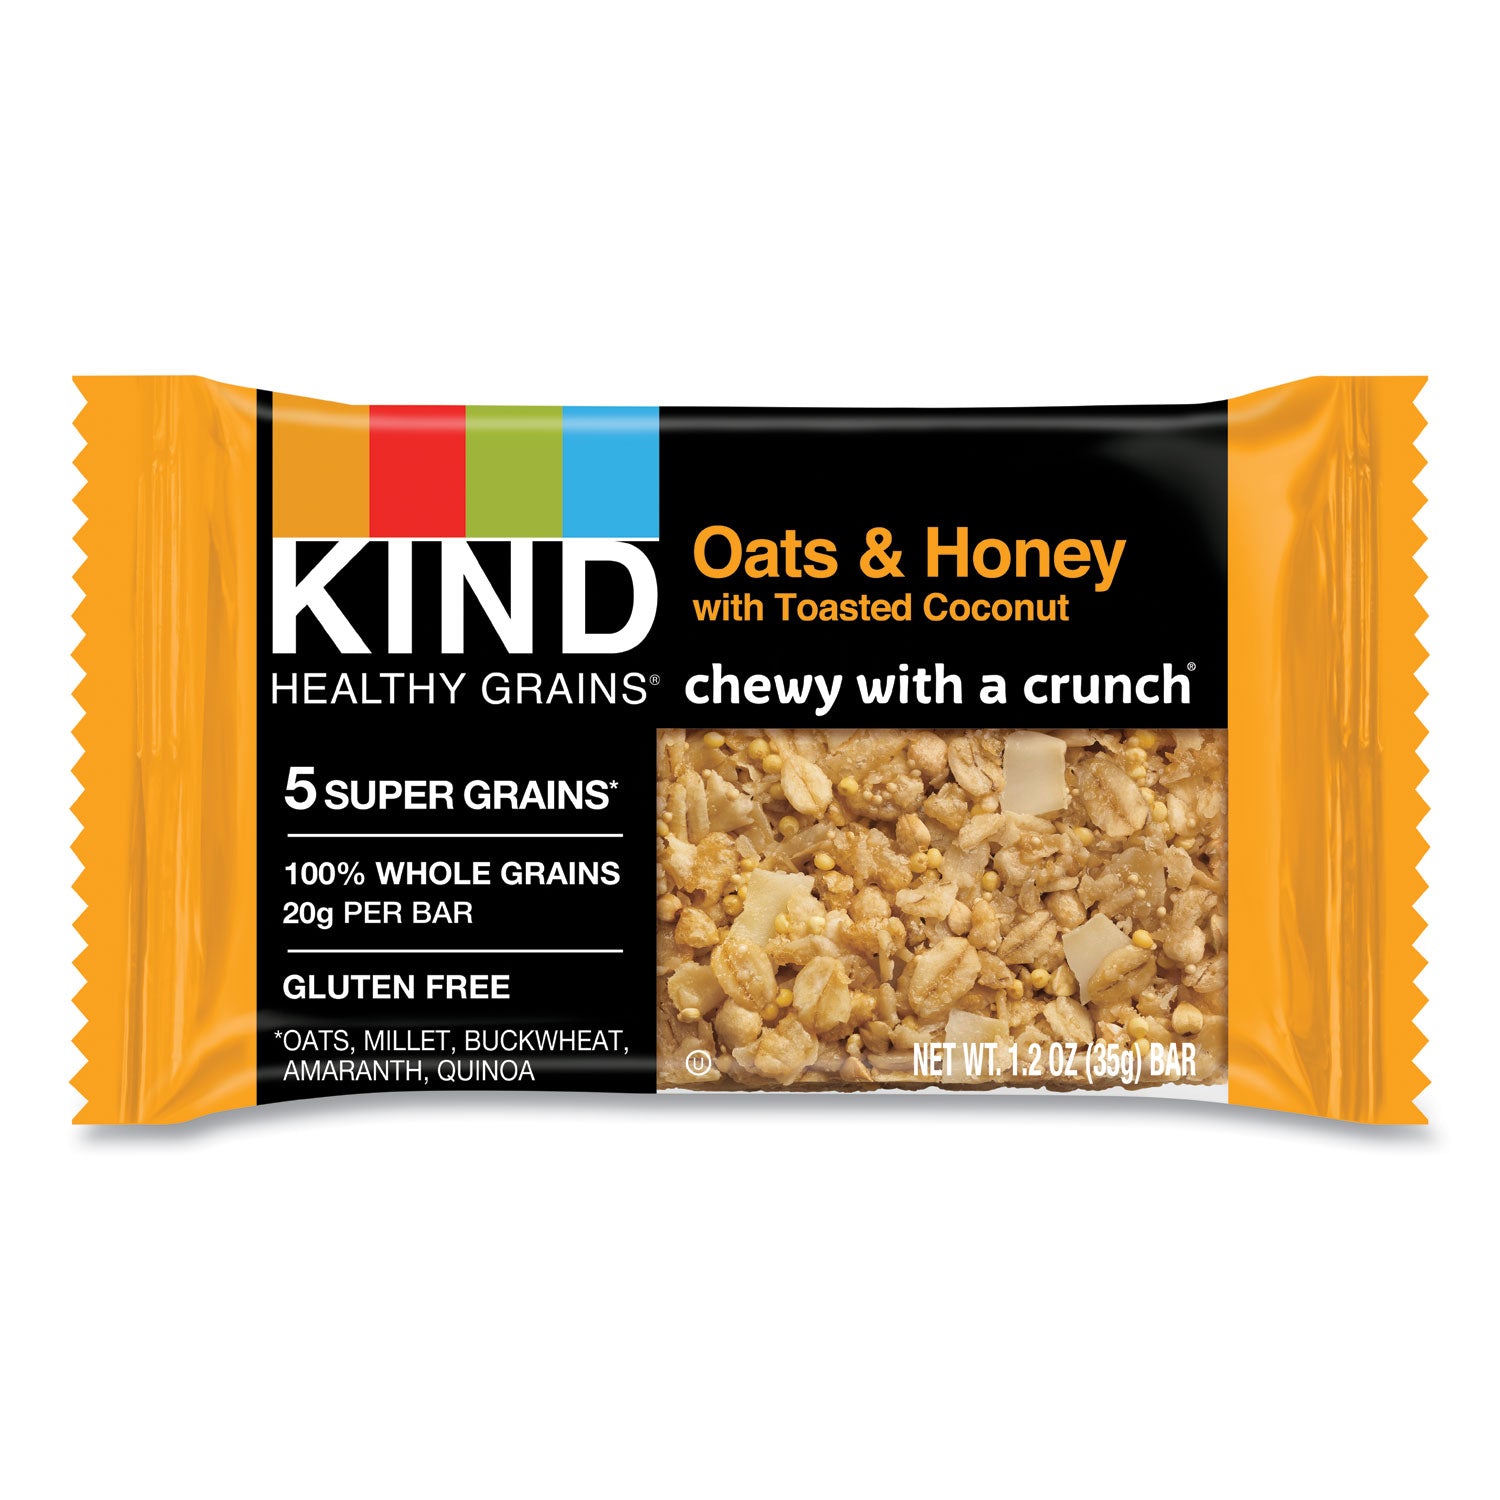 healthy-grains-bar-oats-and-honey-with-toasted-coconut-12-oz-12-box_knd18080 - 2